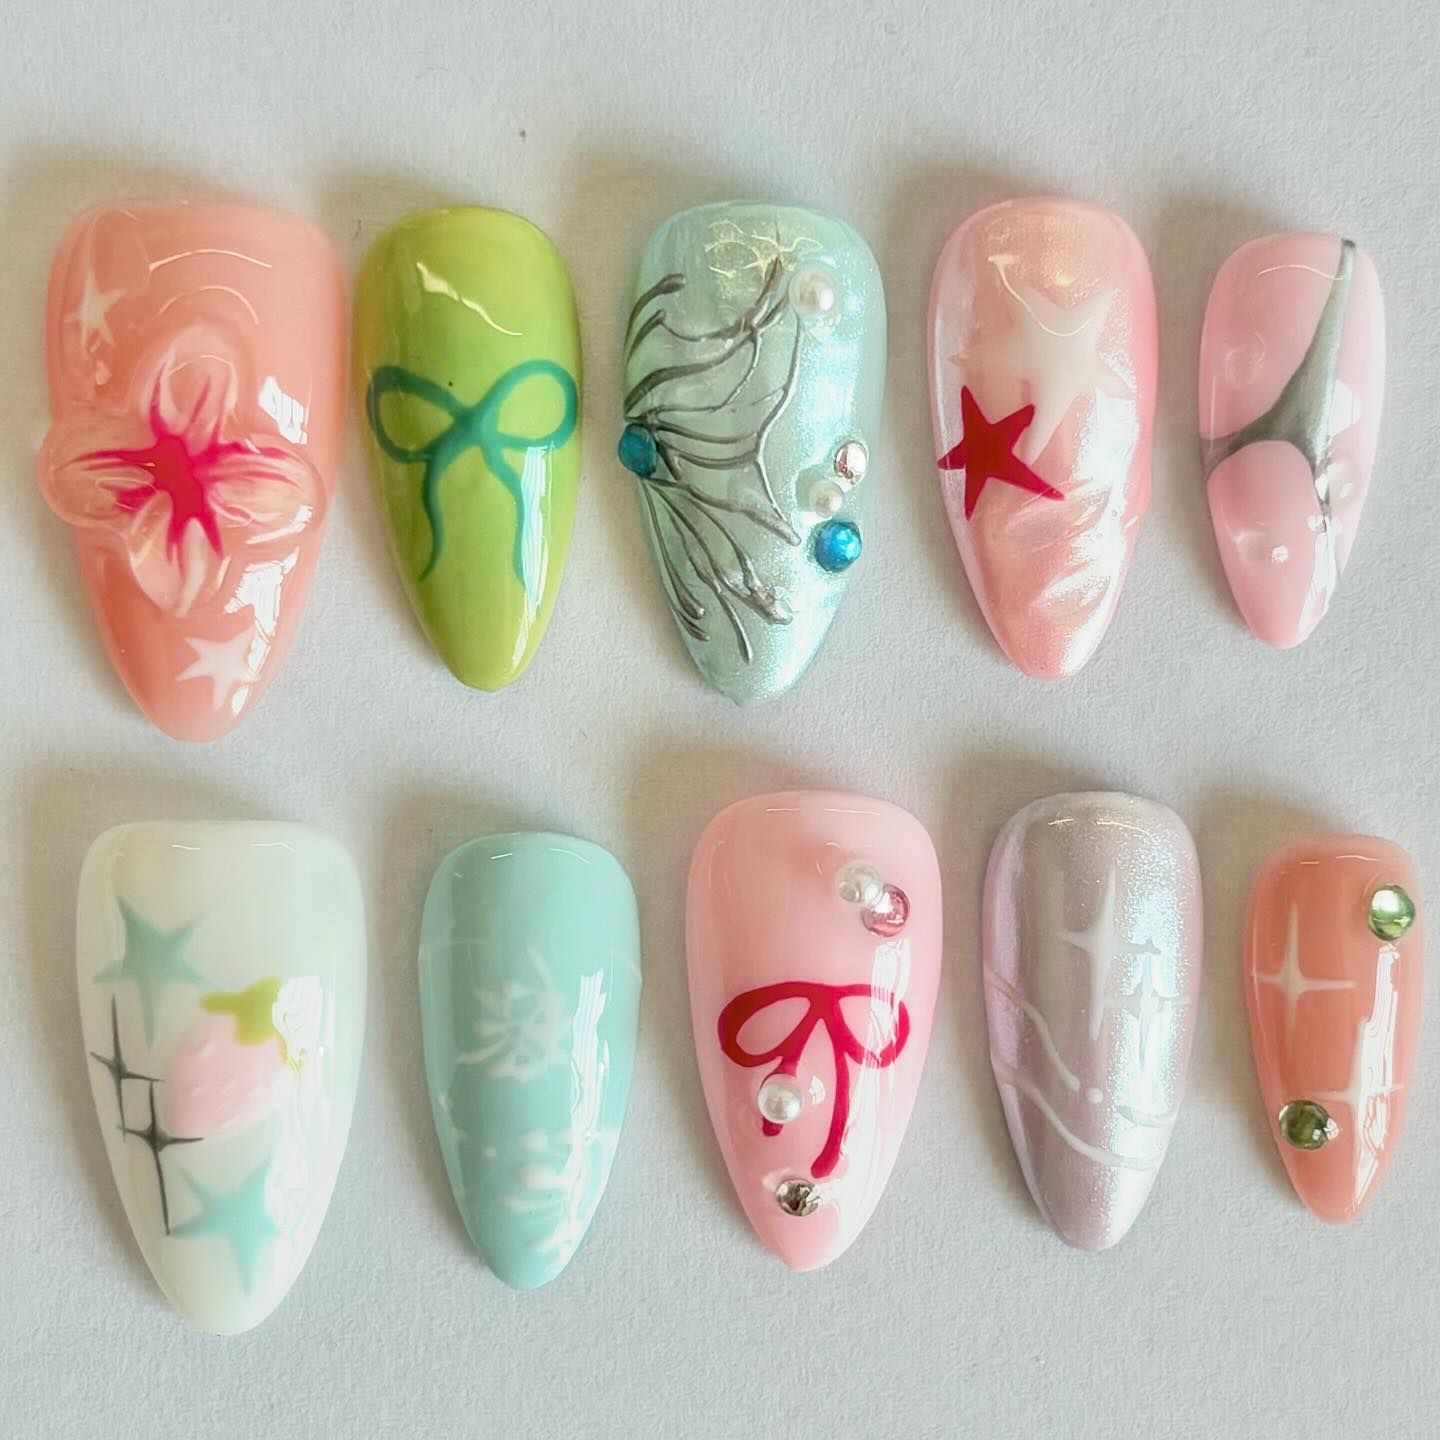 Spring Whimsy with Pastel Nail Art and Dazzling Accents